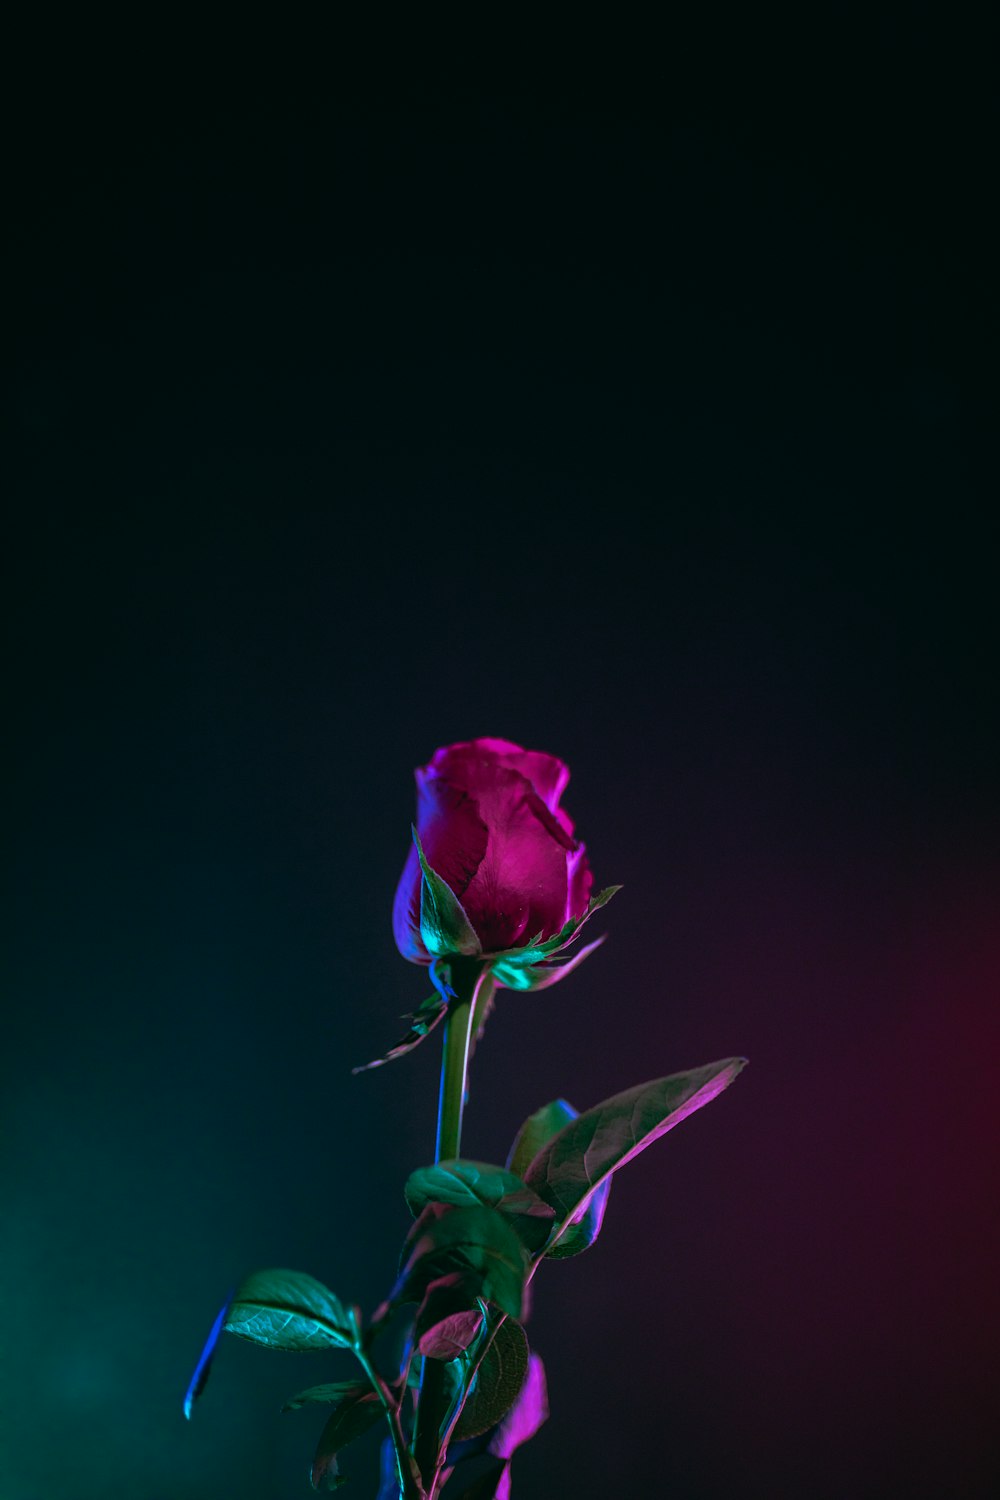 red rose with black background hd wallpaper